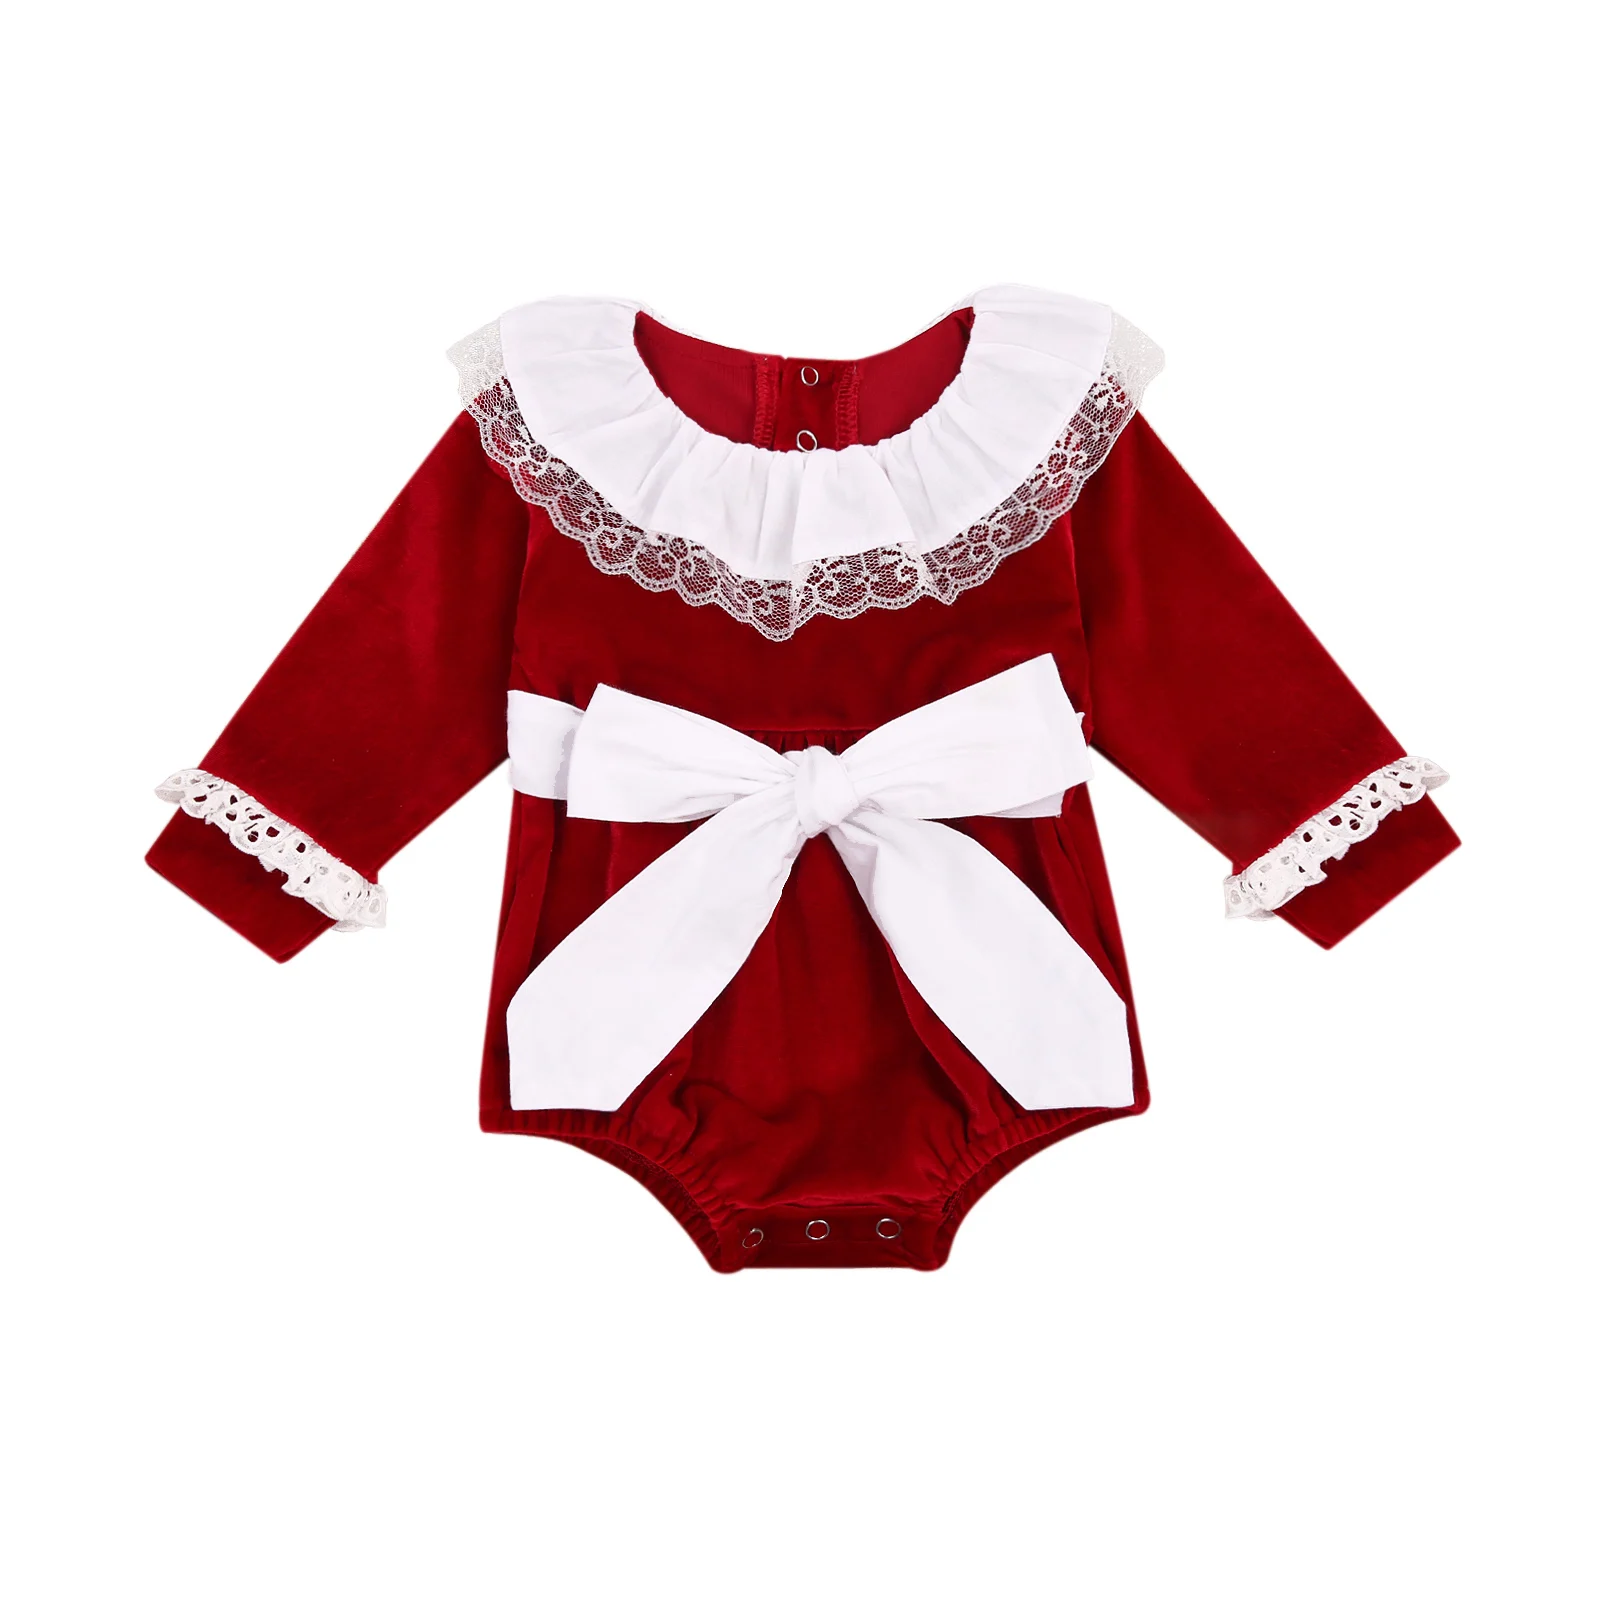 

0-24 Months Newborn Casual Style Romper Toddler Girls Red Long Sleeve Round Neck Lace Playsuit with Bowknot Belt One-piece